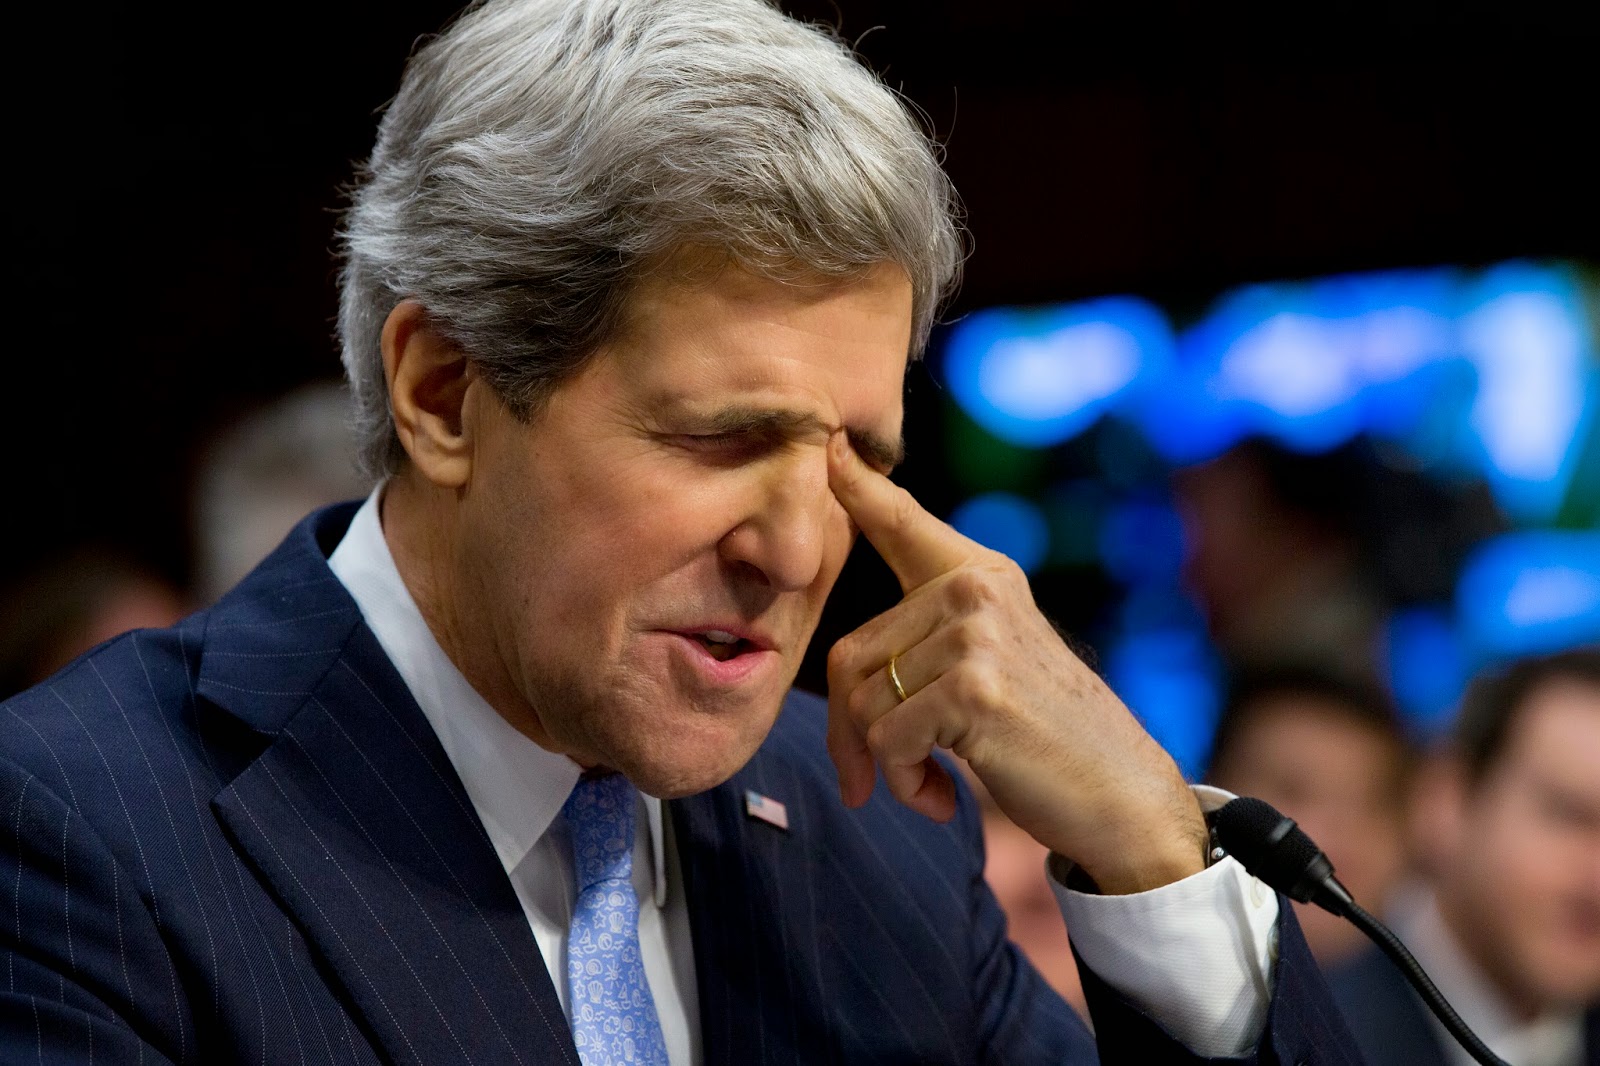 Kerry condemns Palestinian attacks as he meets Israel PM